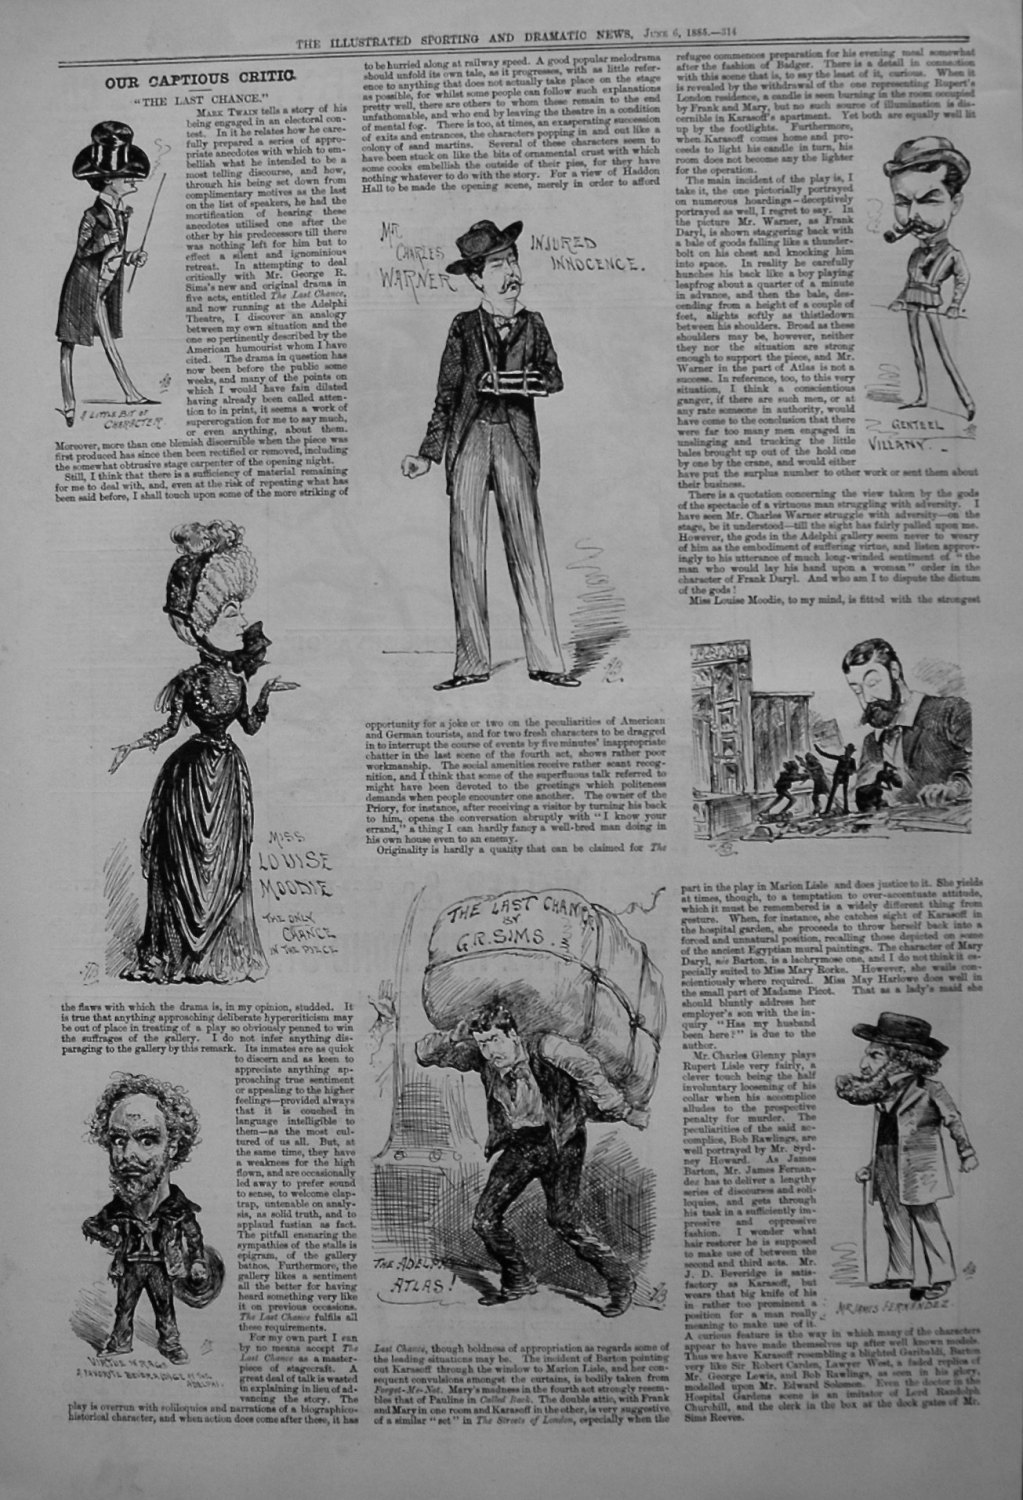 Our Captious Critic. June 6th. 1885.